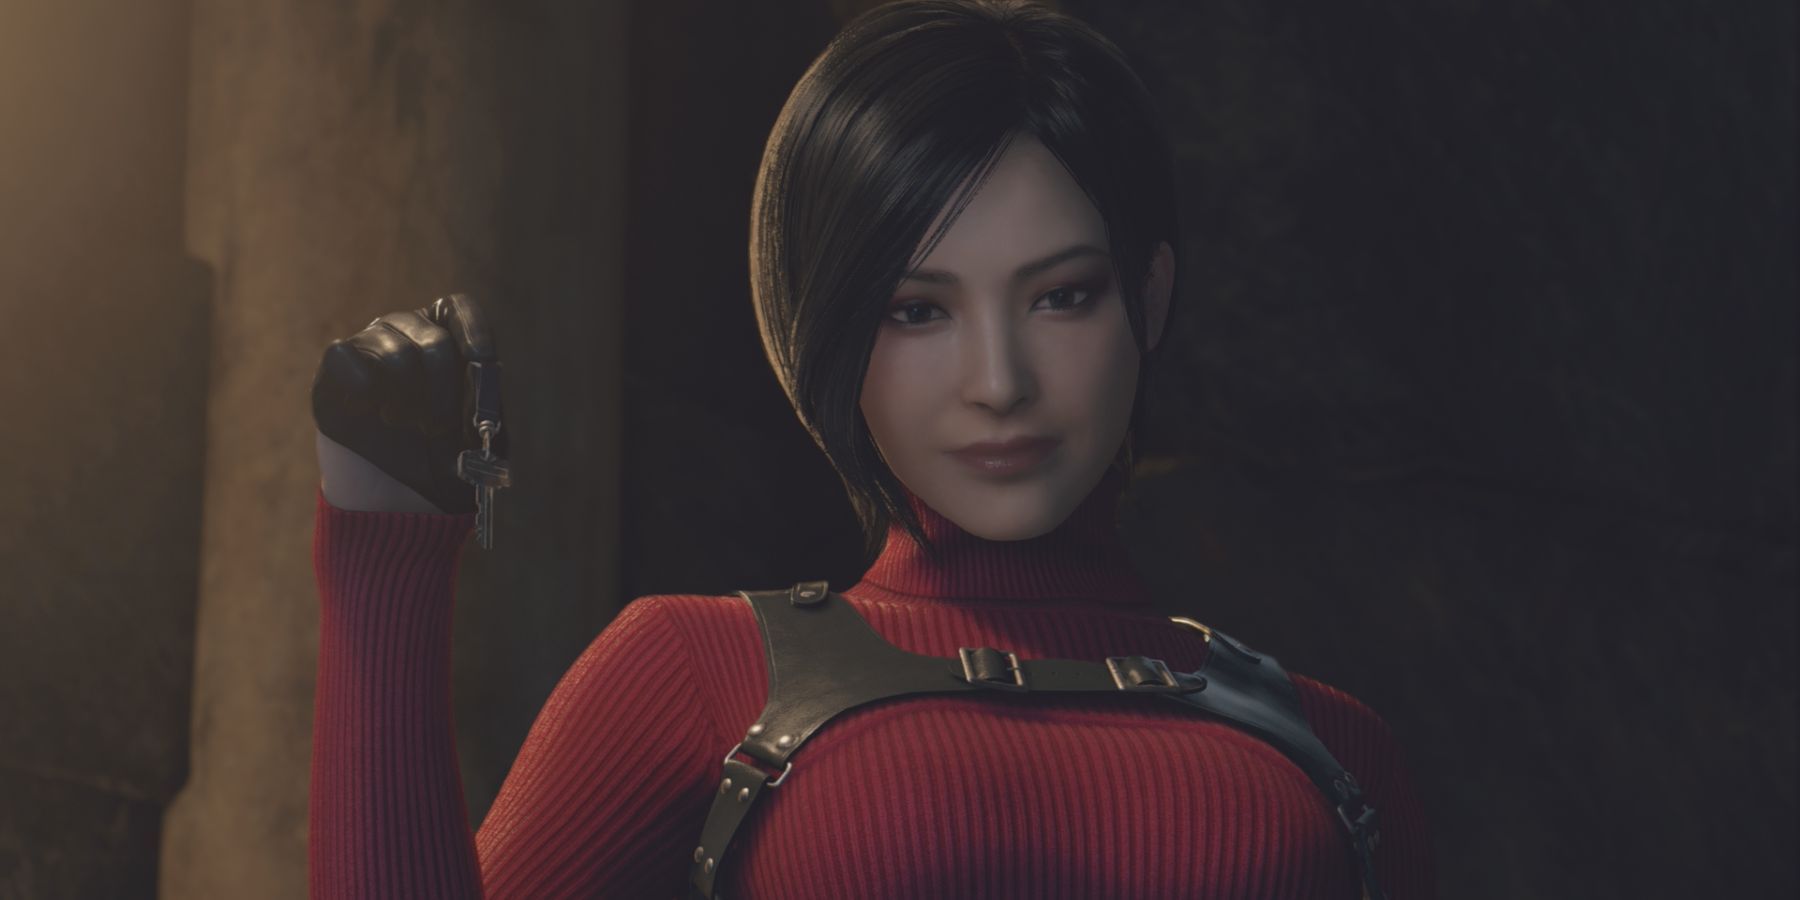 resident evil 4 remake ada wong actor controversy lily gao jolene andersen